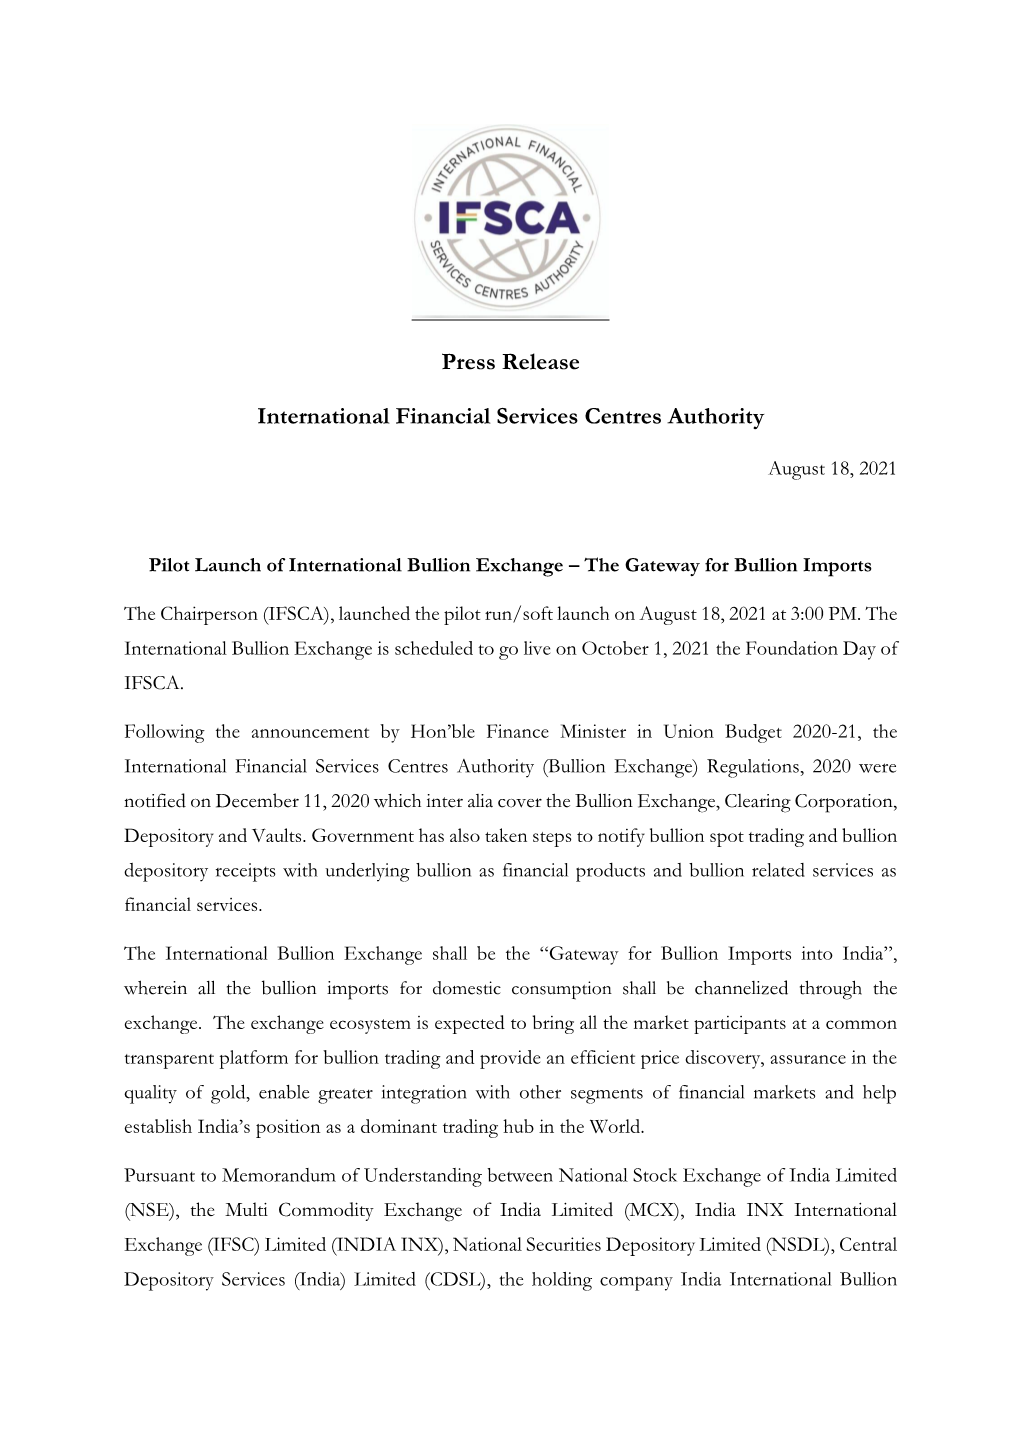 Press Release International Financial Services Centres Authority